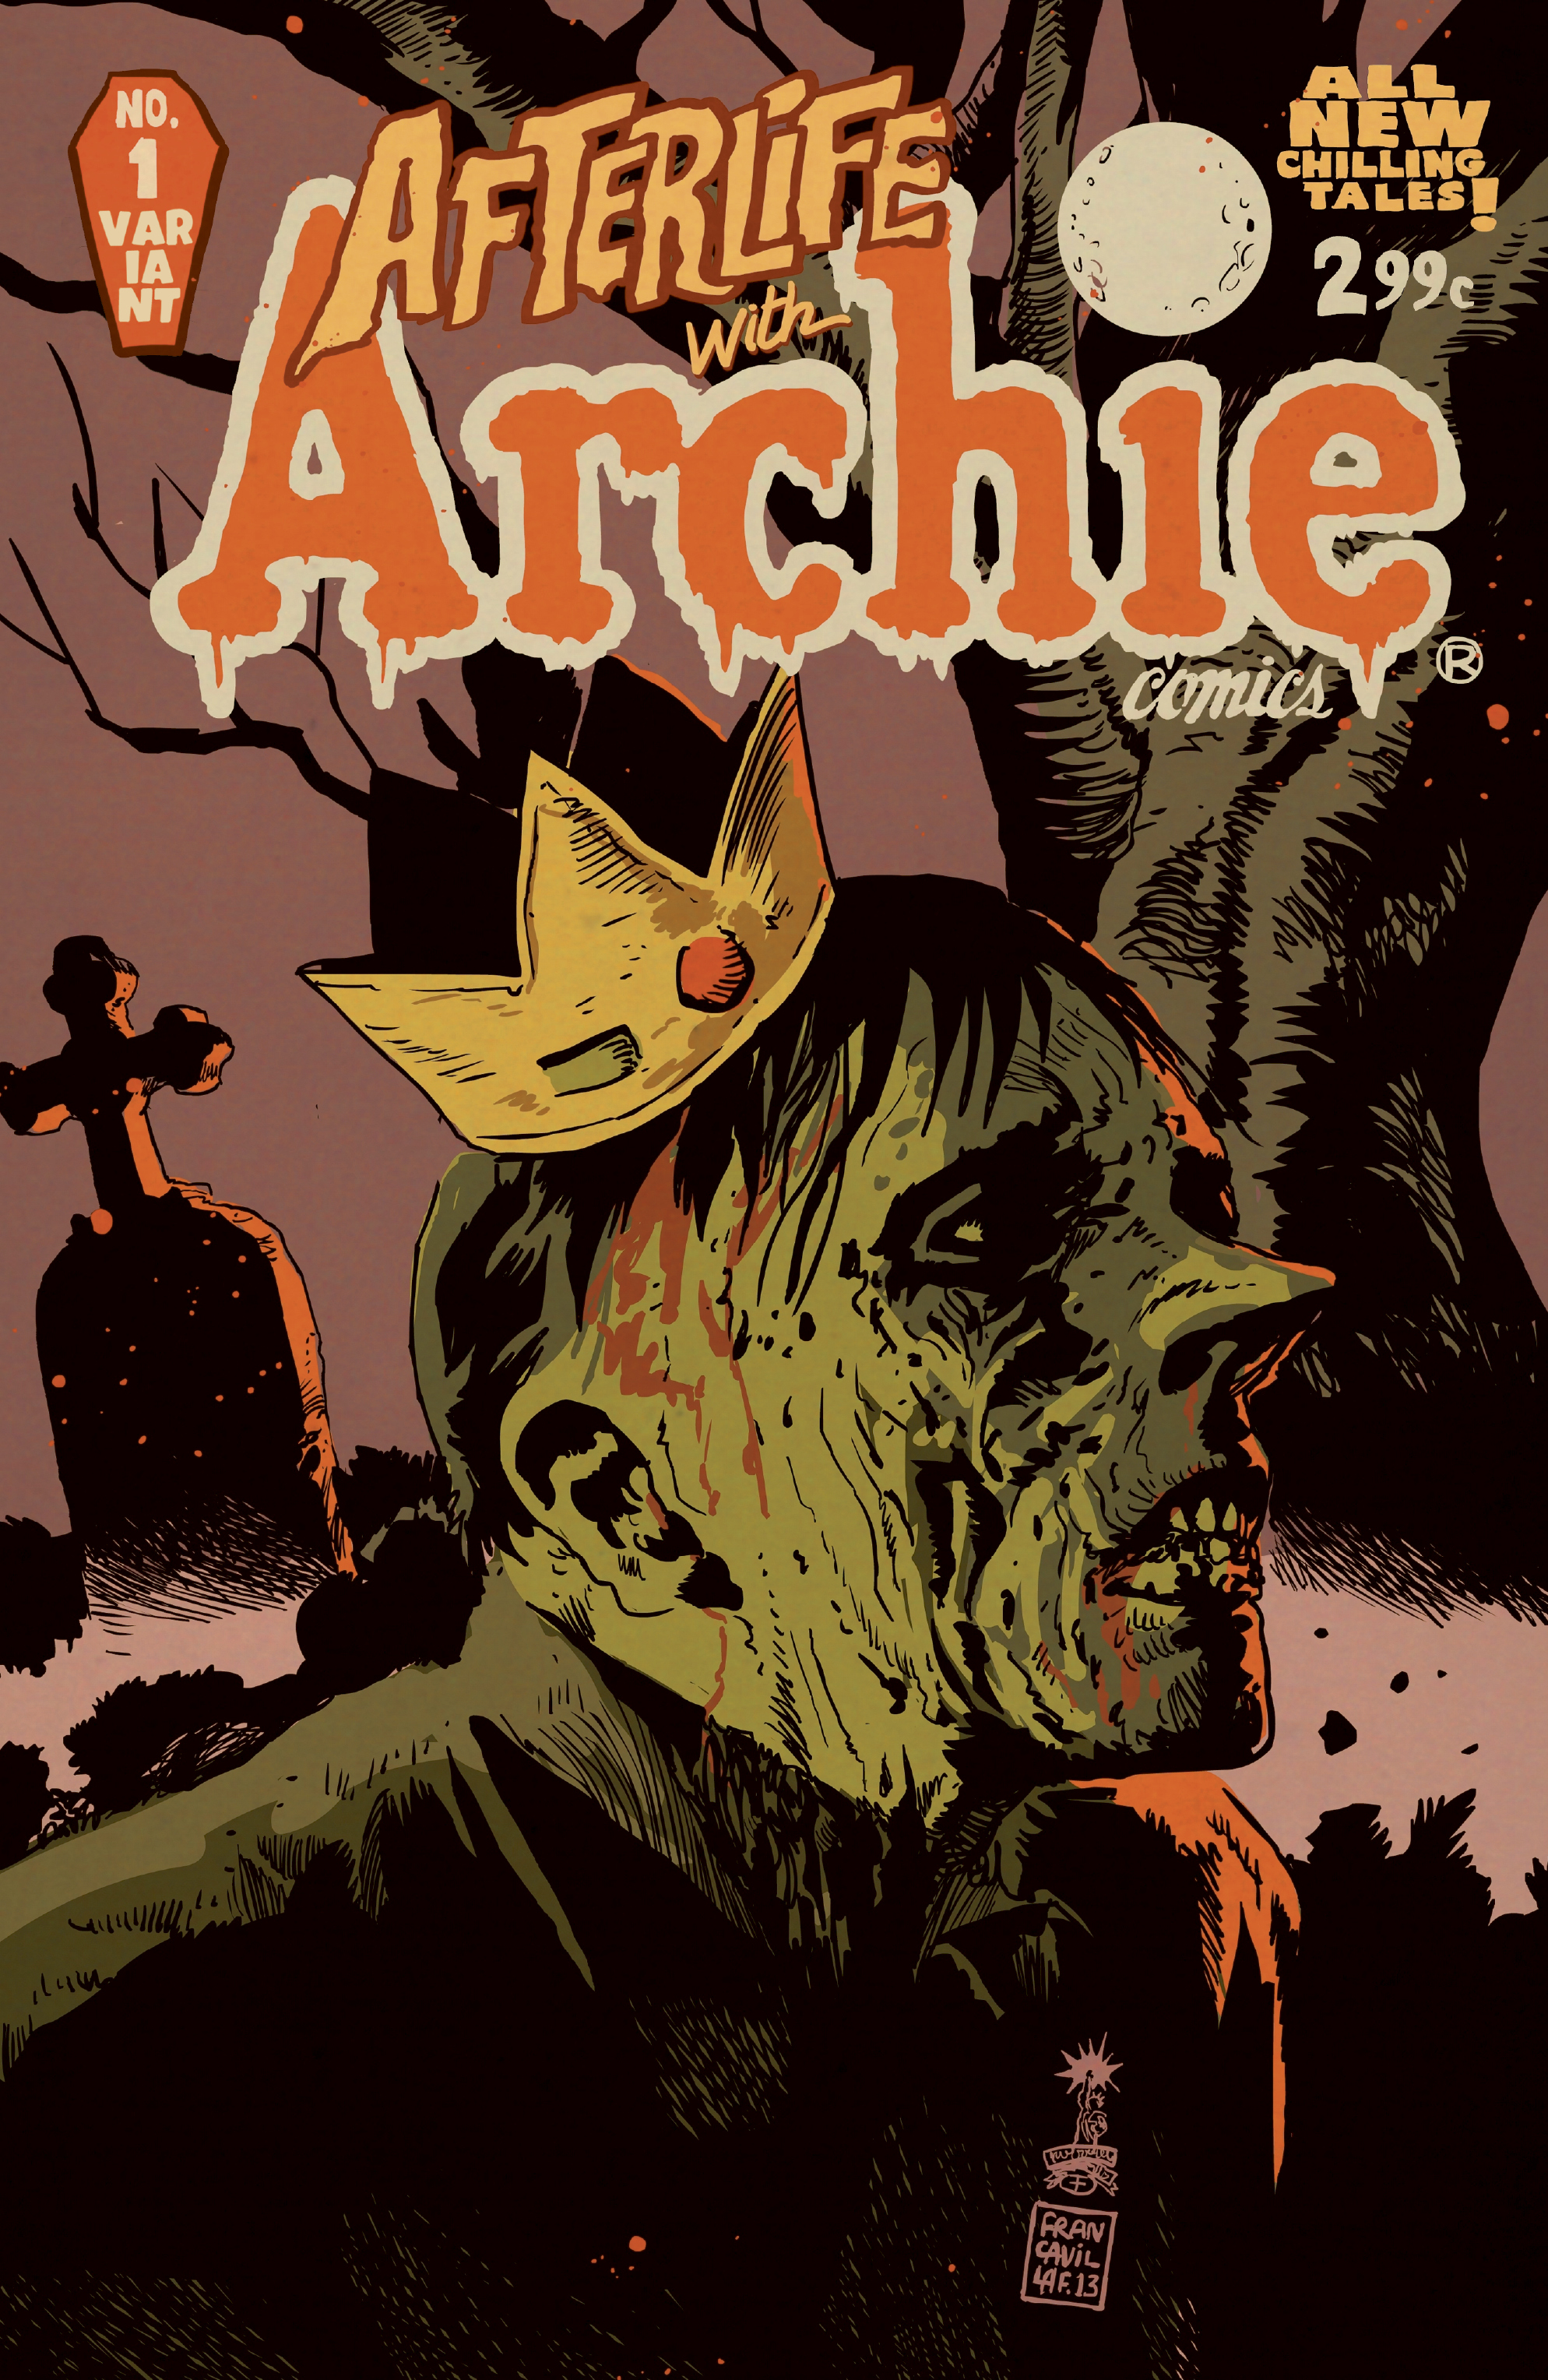 Afterlife With Archie #9